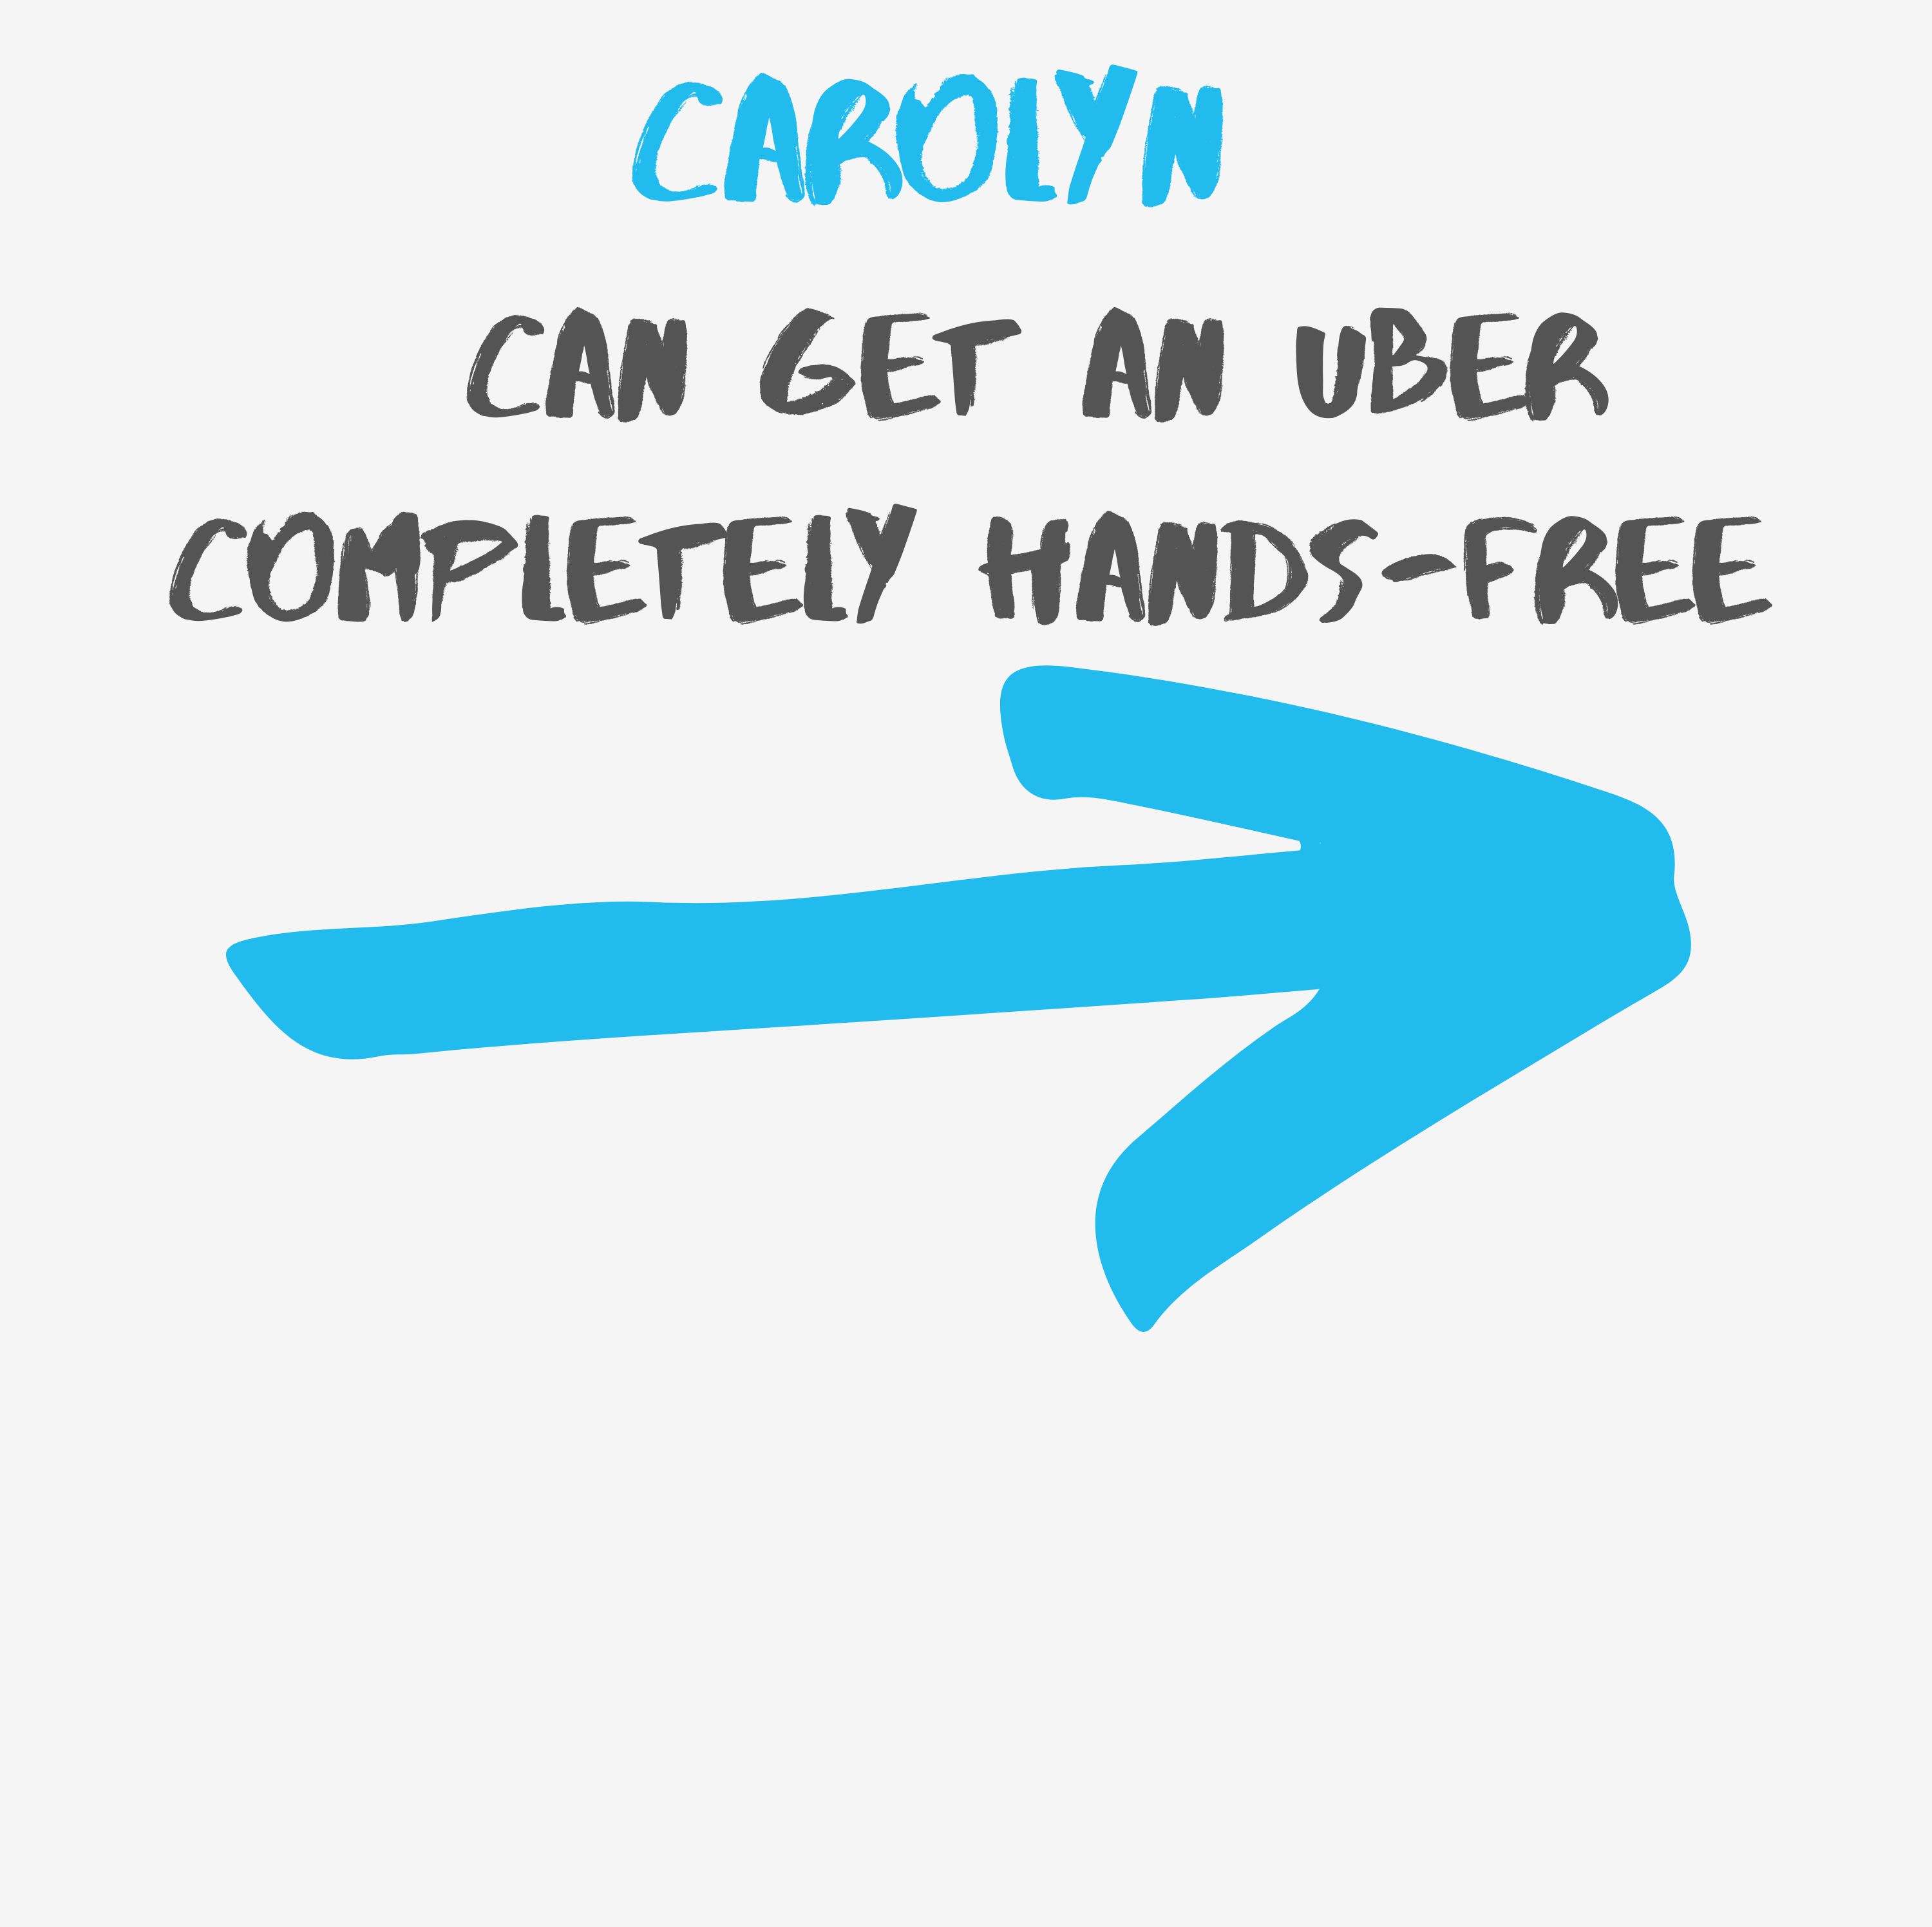 Carolyn can order an uber completely Hands-free, watch the video.